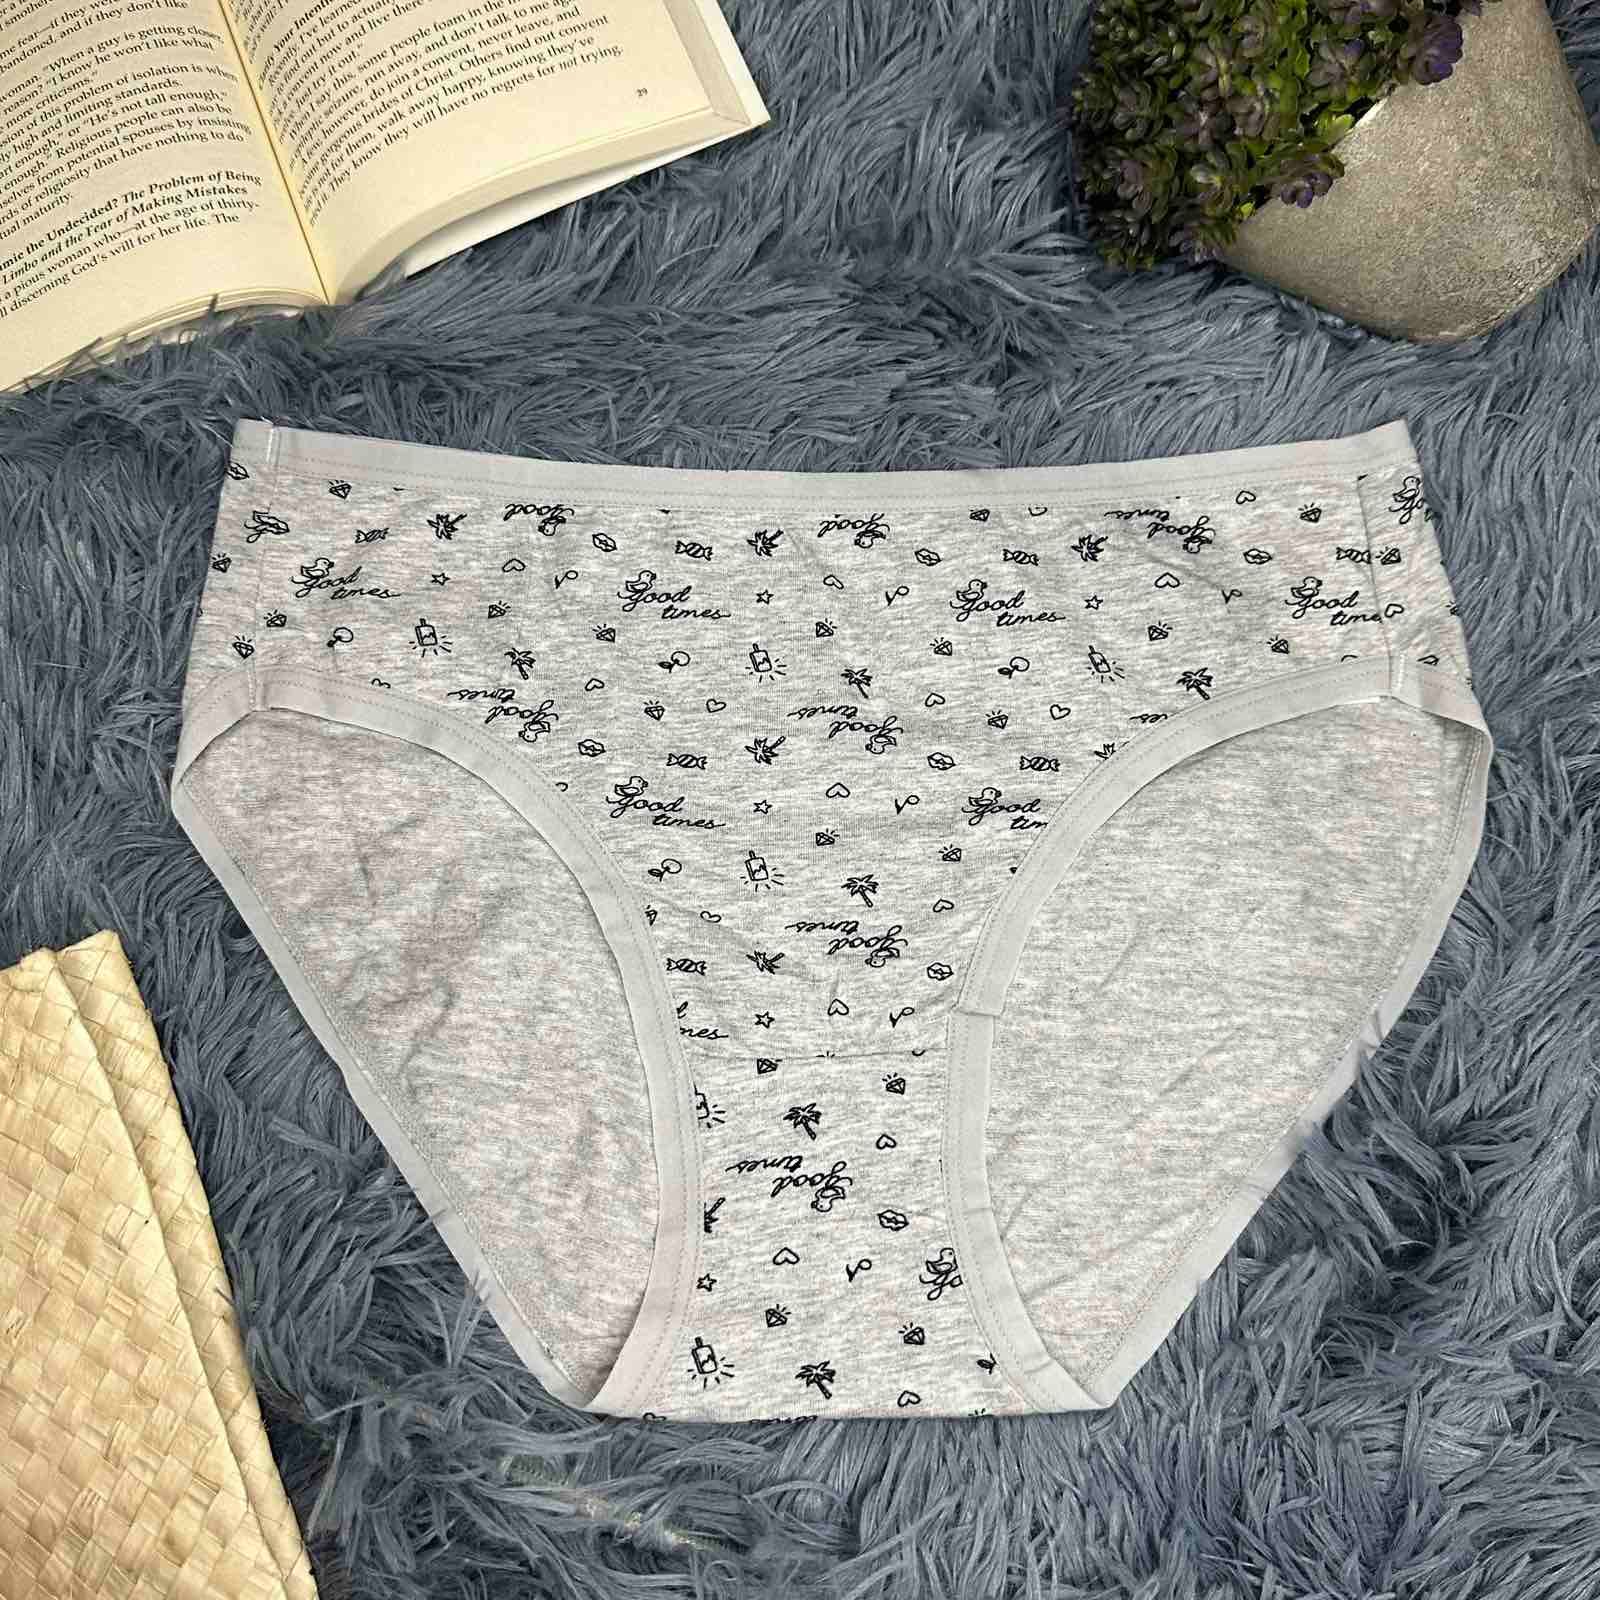 Lira Women's Panty Antimicrobial Cotton Full Panty High Quality Underwear  Cotton and Spandex Women's Underwear Medium 2 Different Available Color, Abdominal Underpants, Women Clothing Panties, Lingerie, Stretchable, Midwaist